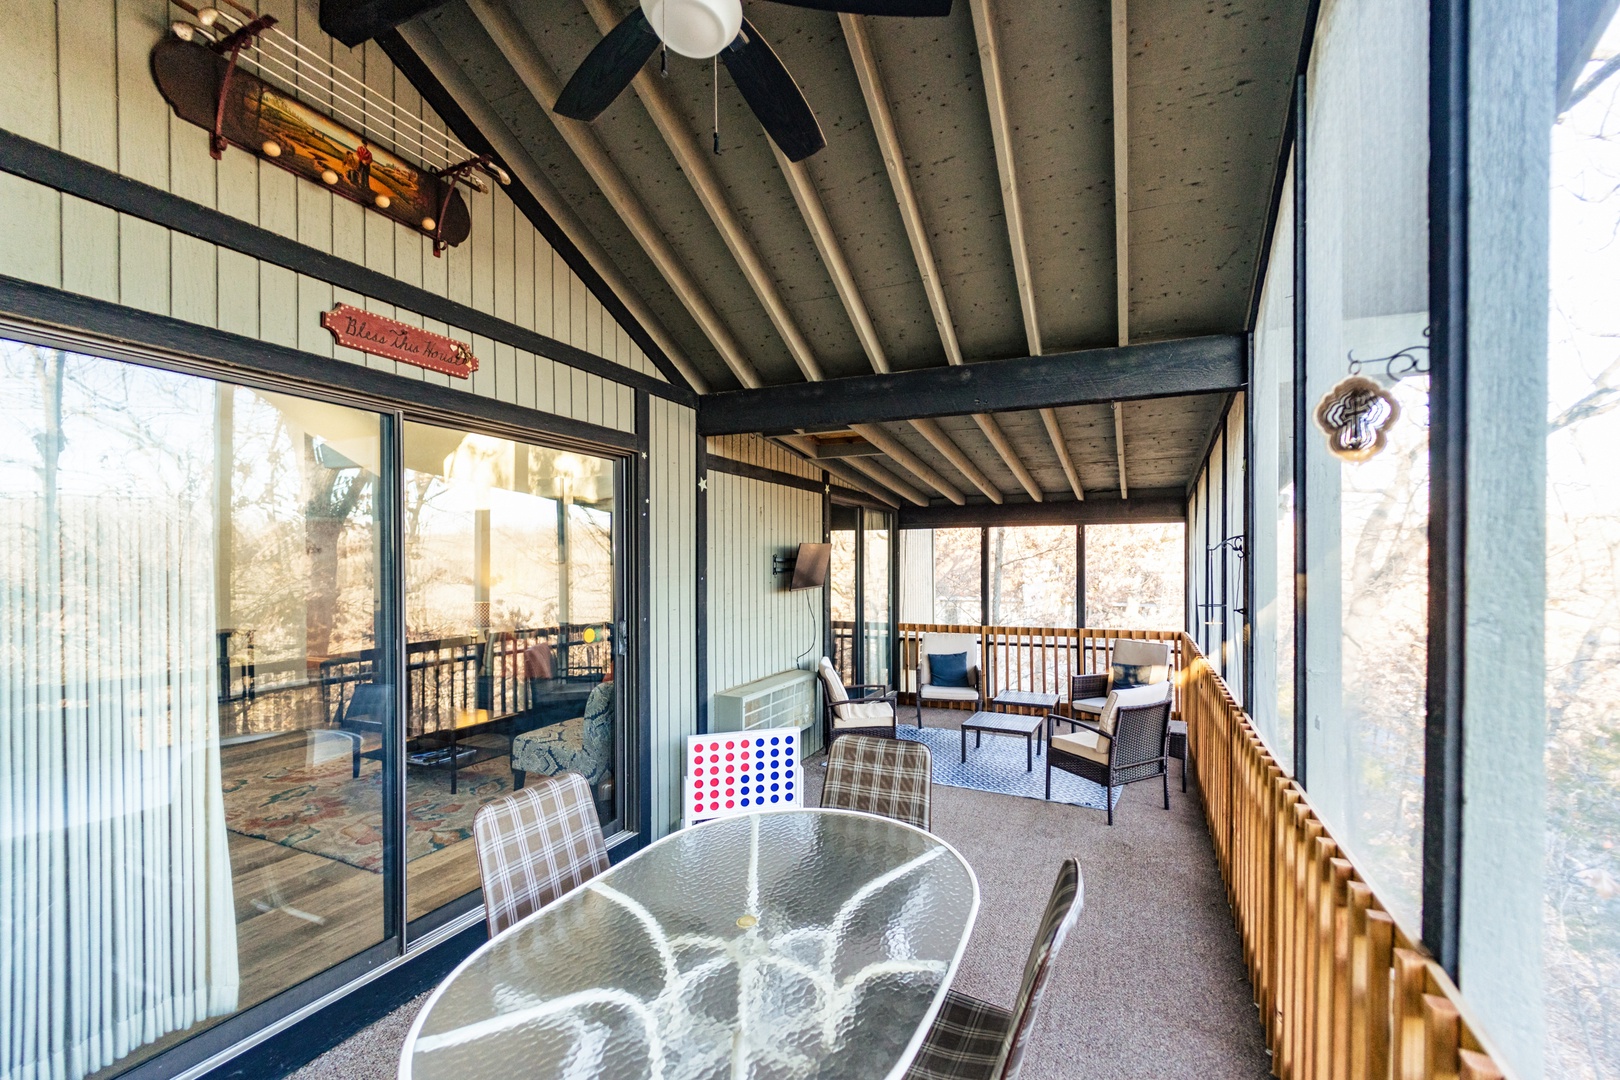 Step out onto the upper-level back deck & lounge in the fresh air with a view